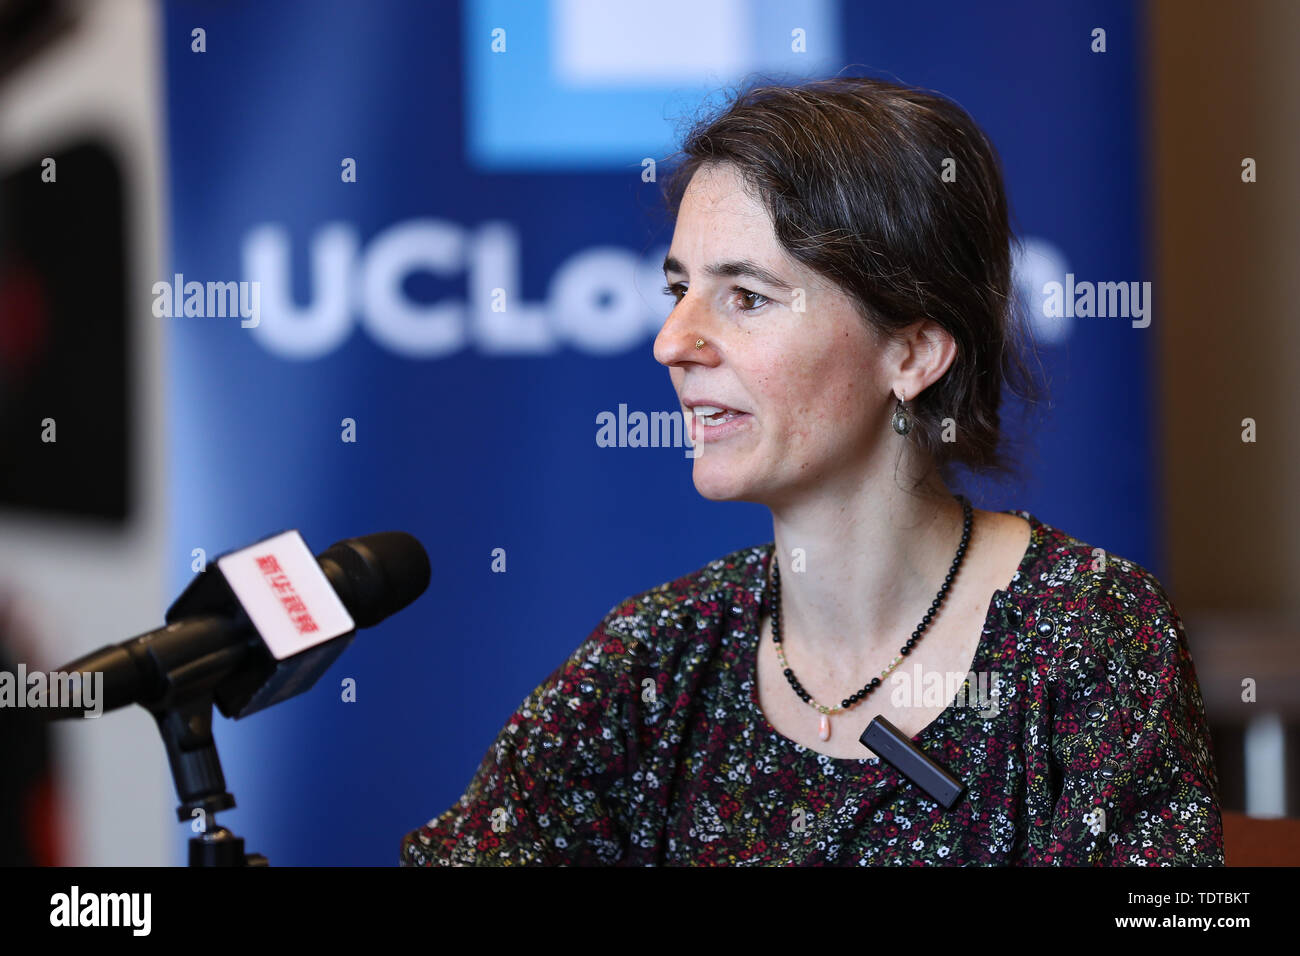 Beijing, Belgium. 12th June, 2019. Samia Patsalides, the international relations officer for Asia of Belgium's University of Louvain (UCL), receives an interview with Xinhua at UCL near Brussels, Belgium, June 12, 2019. Credit: Zhang Cheng/Xinhua/Alamy Live News Stock Photo